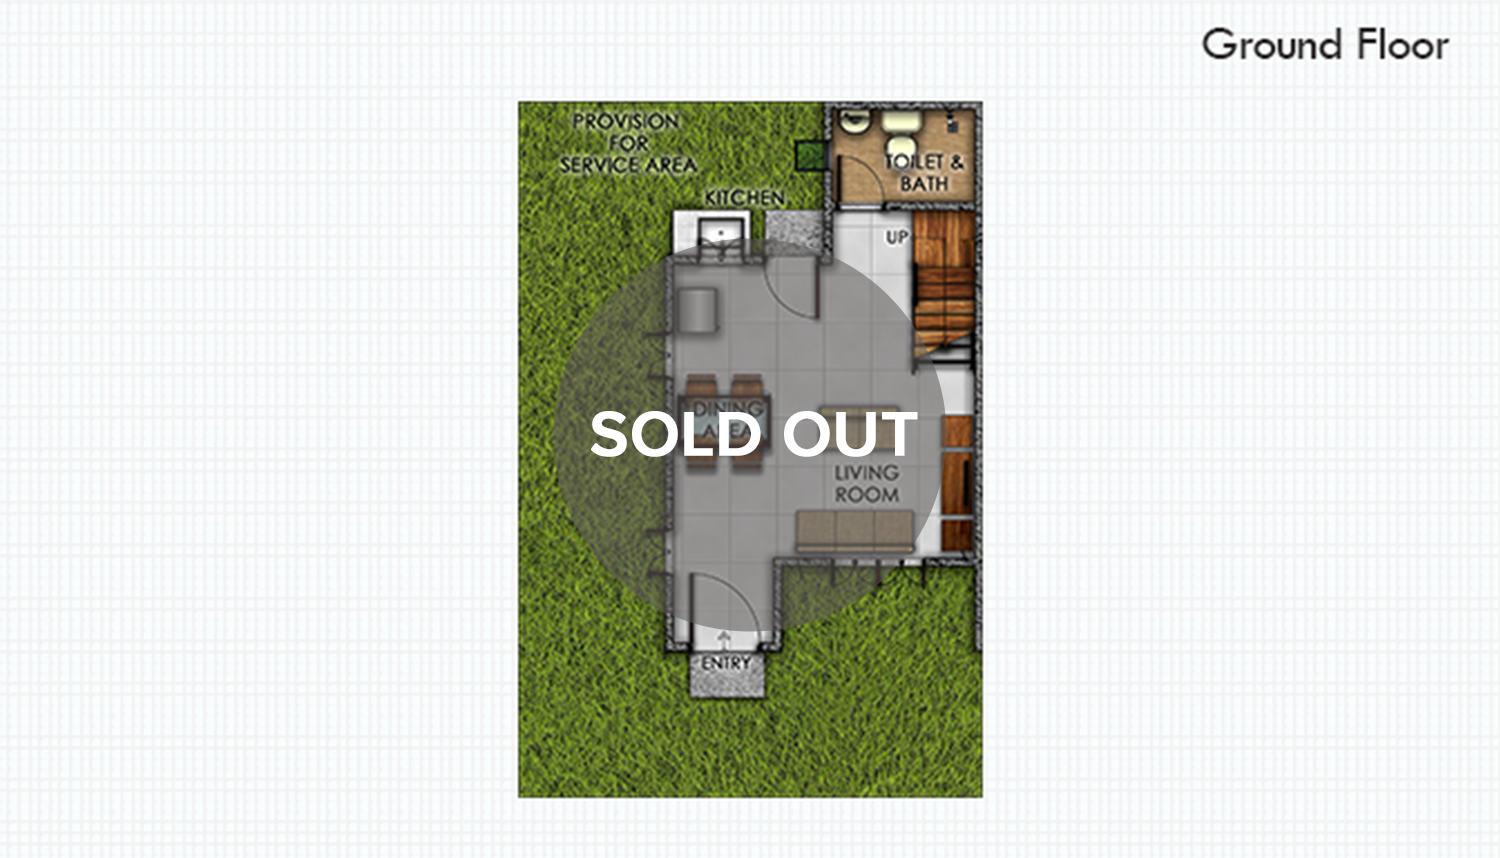 /assets/properties-house-model-gallery-and-landmarks-icons/lumina-home-models/home-model-gallery/armina-single-firewall/armina-single-firewall-ground-floor-plan-sold-out.png